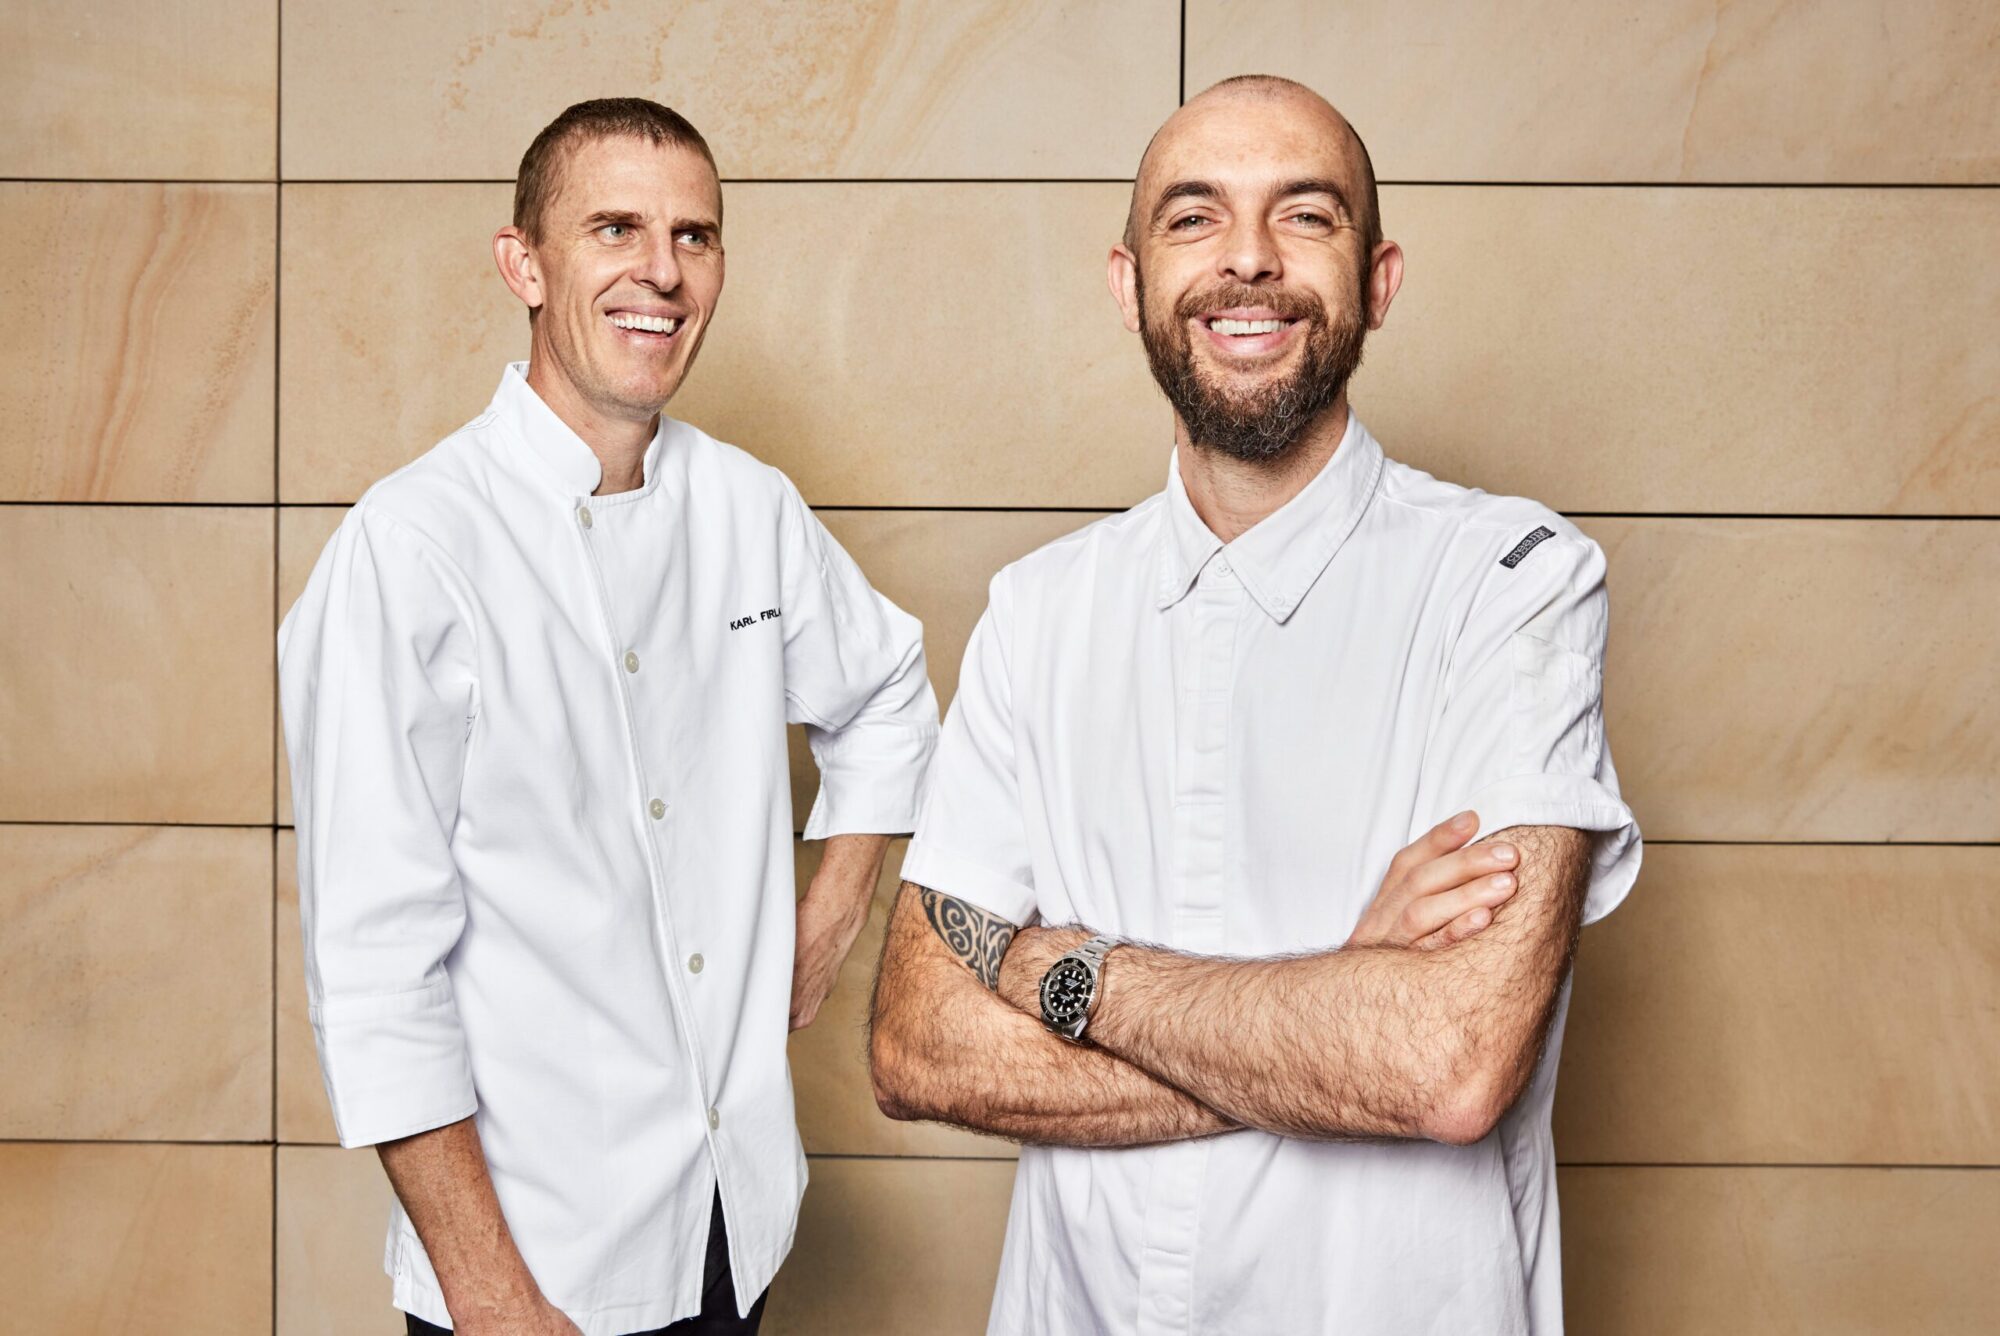 Two of Australia’s best chefs are opening a multi-sensory restaurant in Sydney